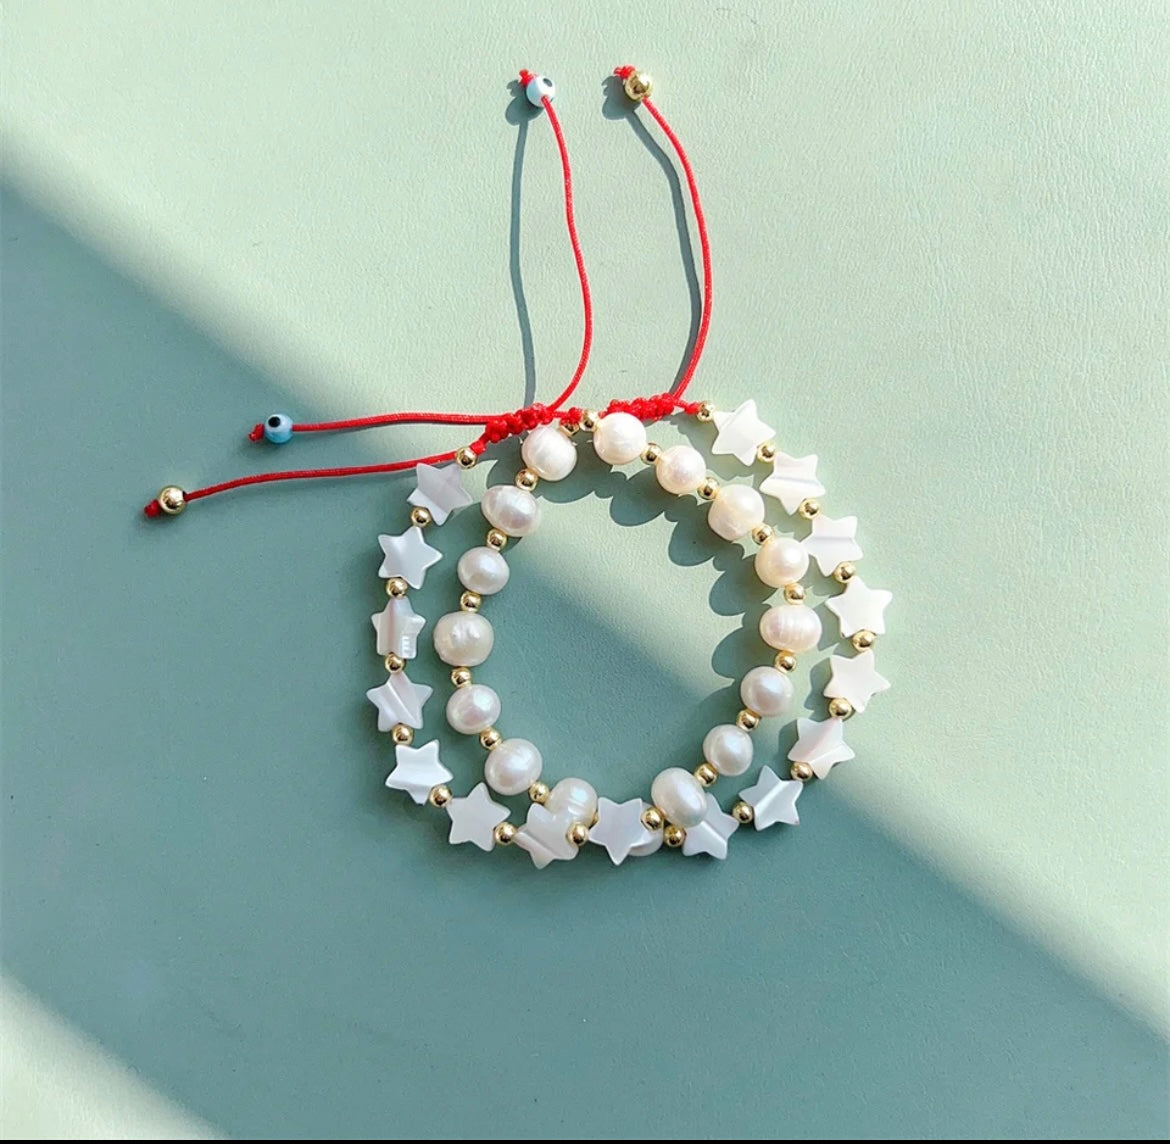 Star and pearl bracelet